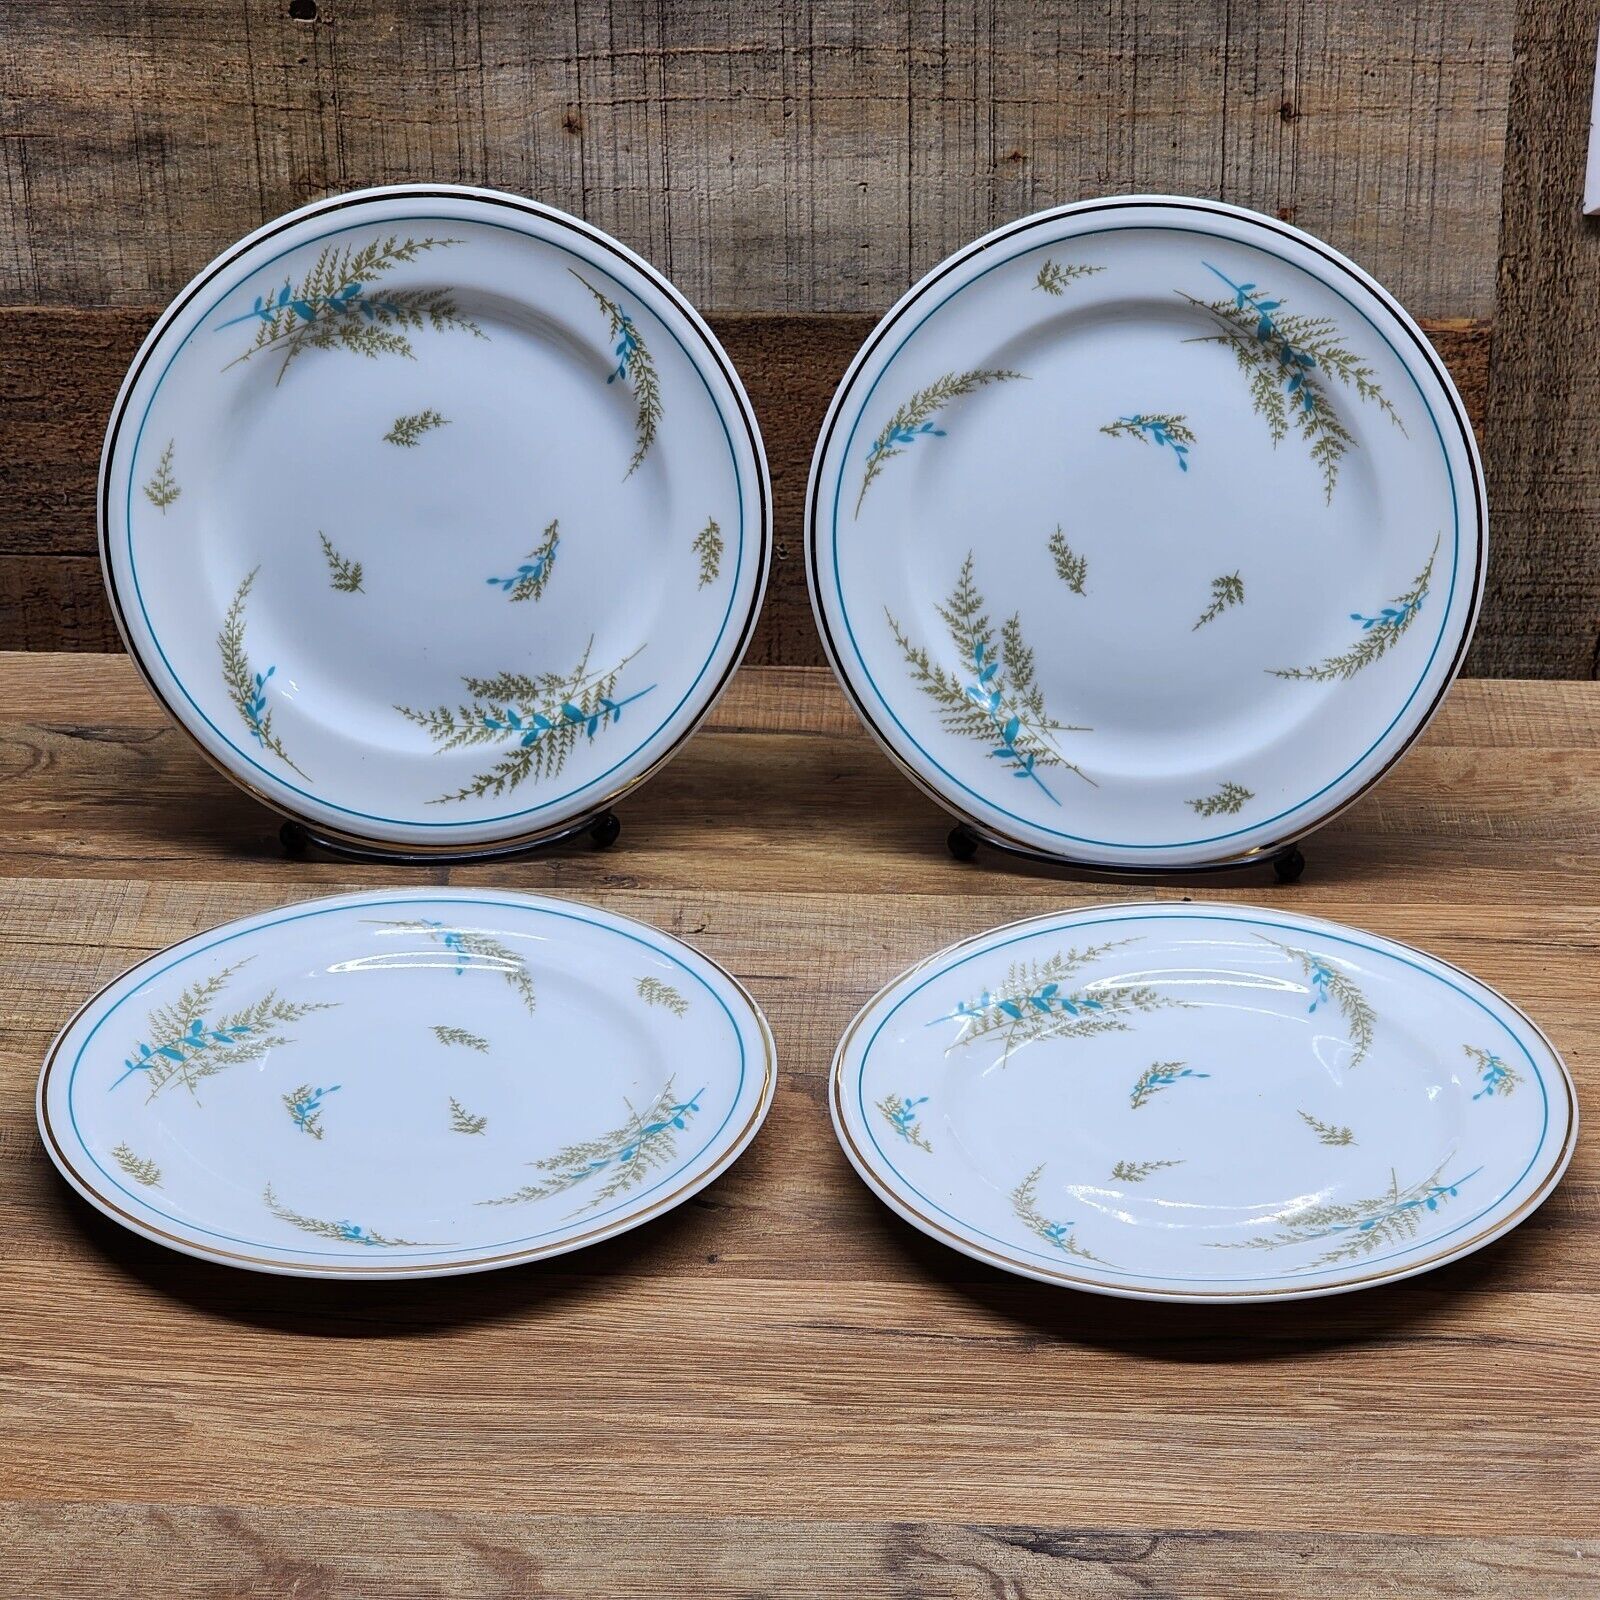 Primary image for RARE Charles Ahrenfeldt Limoges 7⅝” Luncheon Plates (4) Pattern AHR755 - France